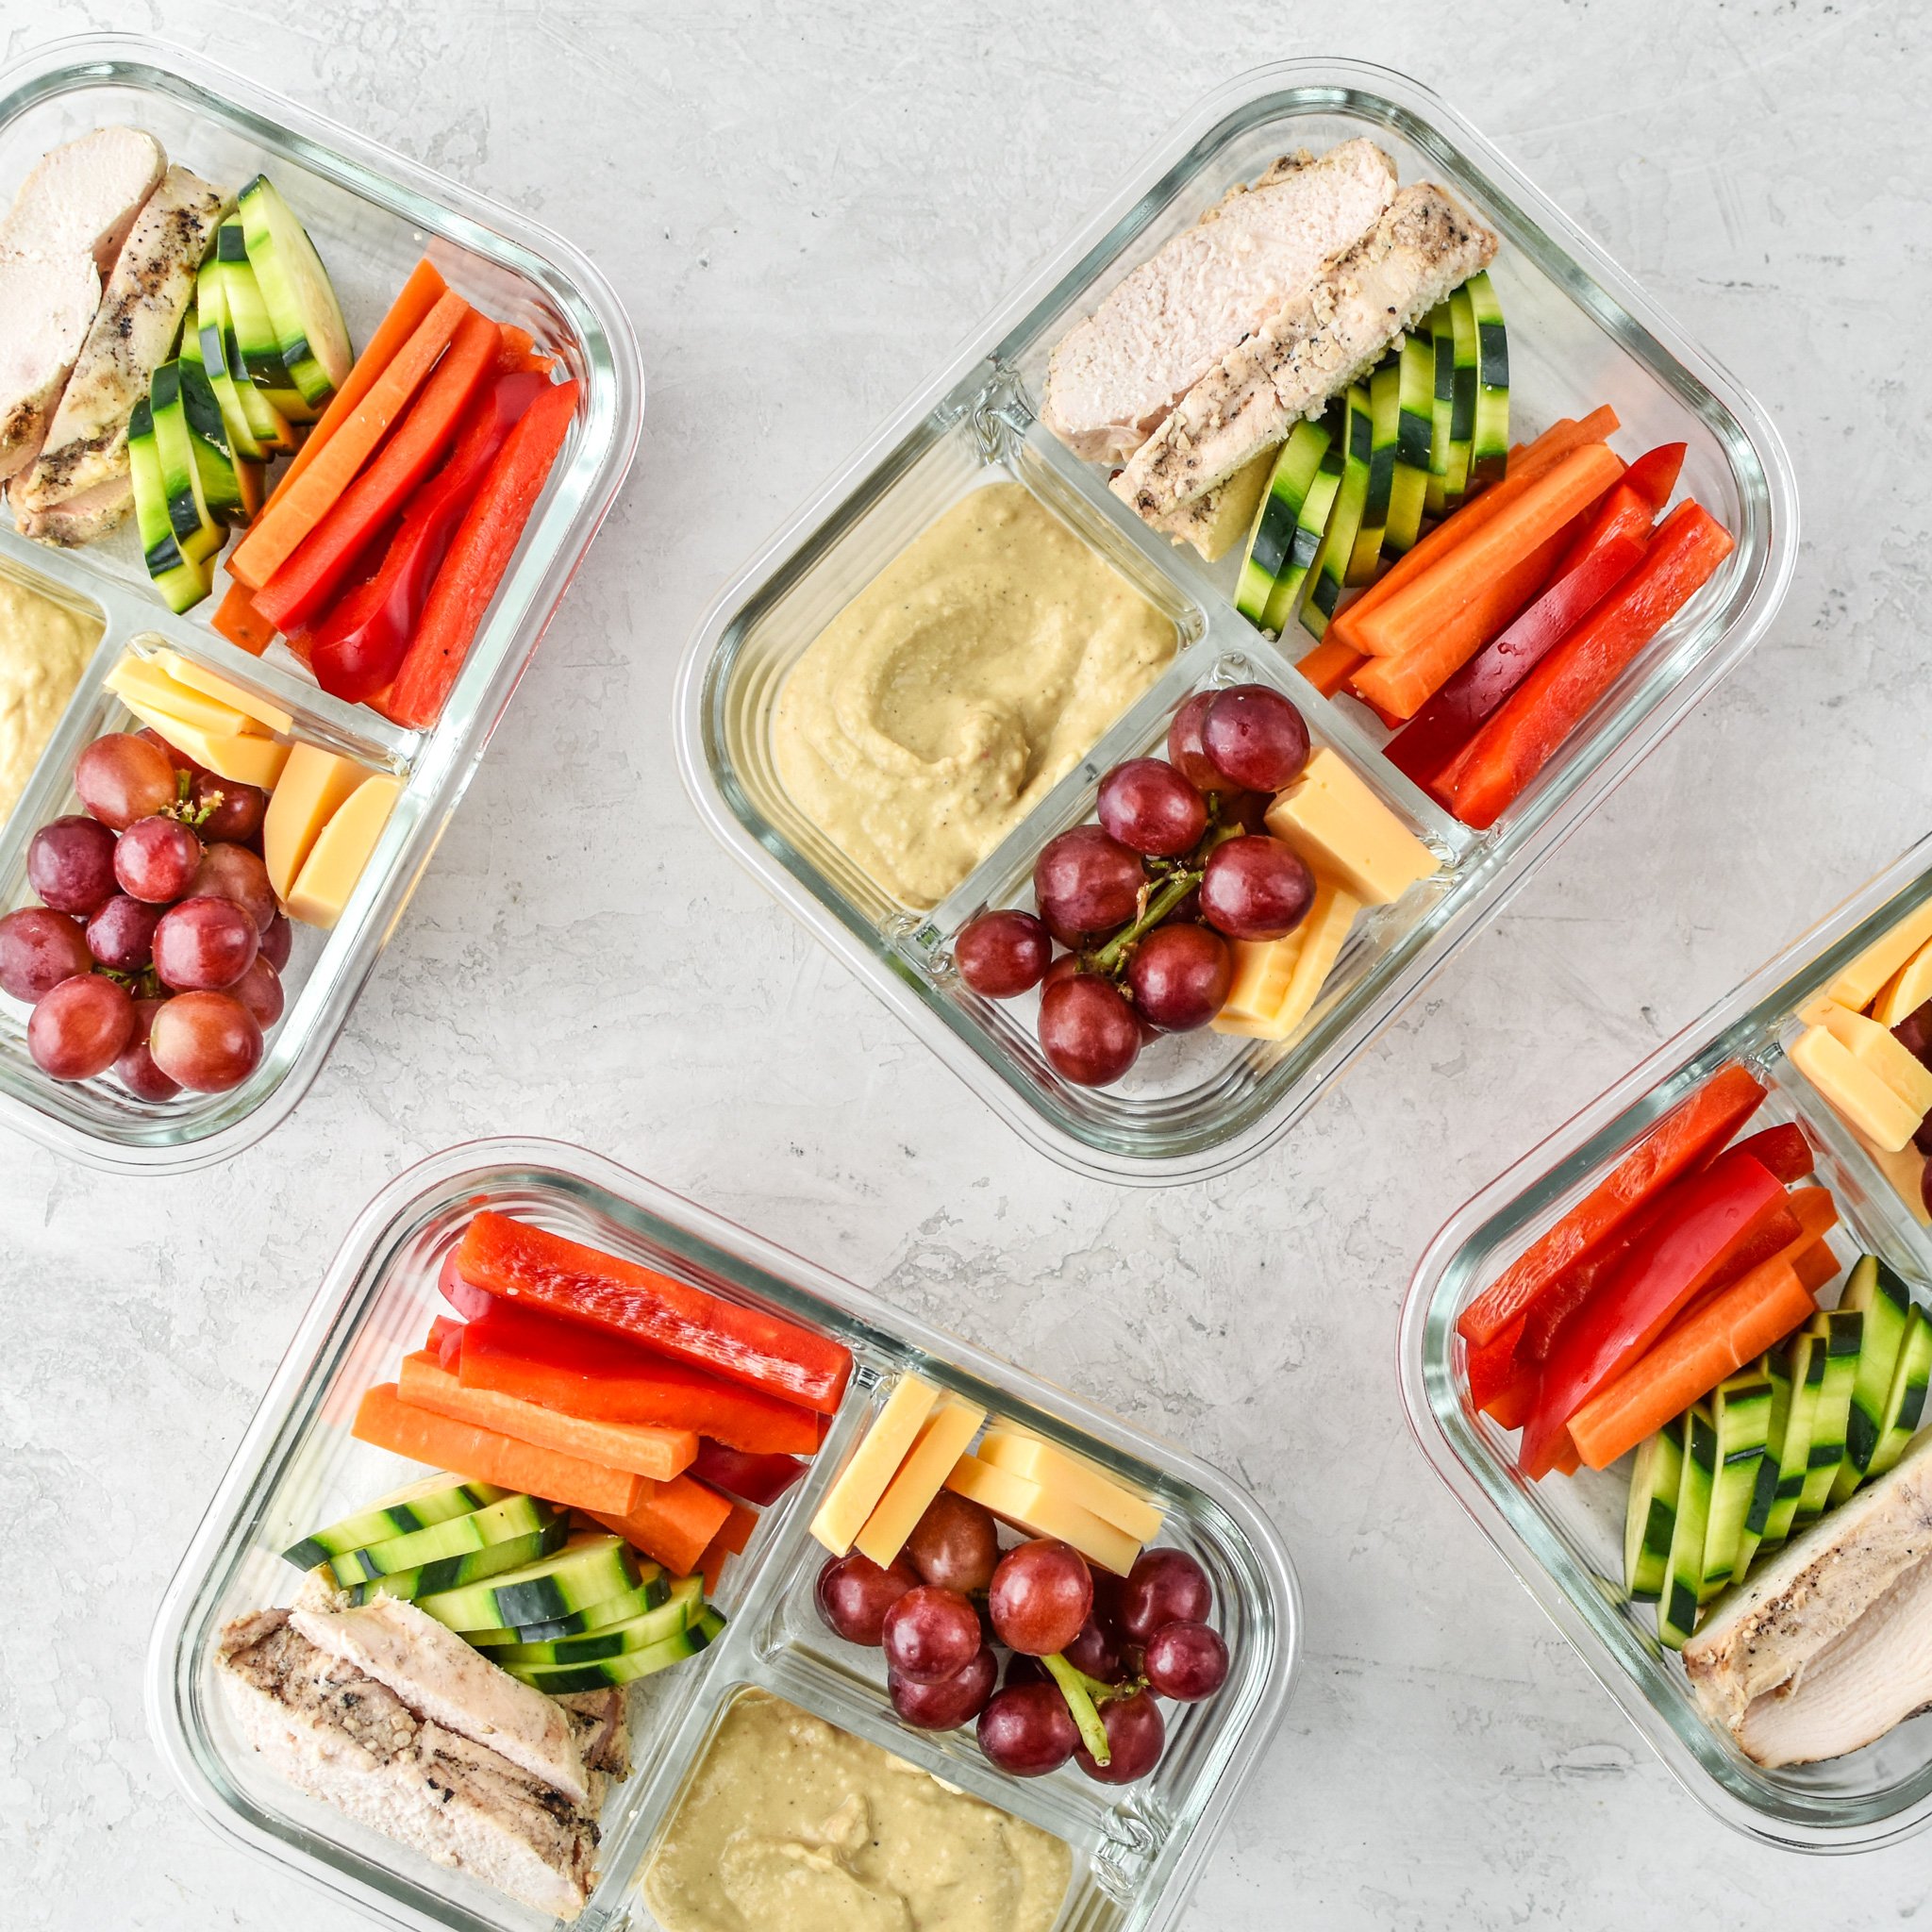 Four Chicken & Hummus Plate Lunch Meal Prep meals ready to be eaten!